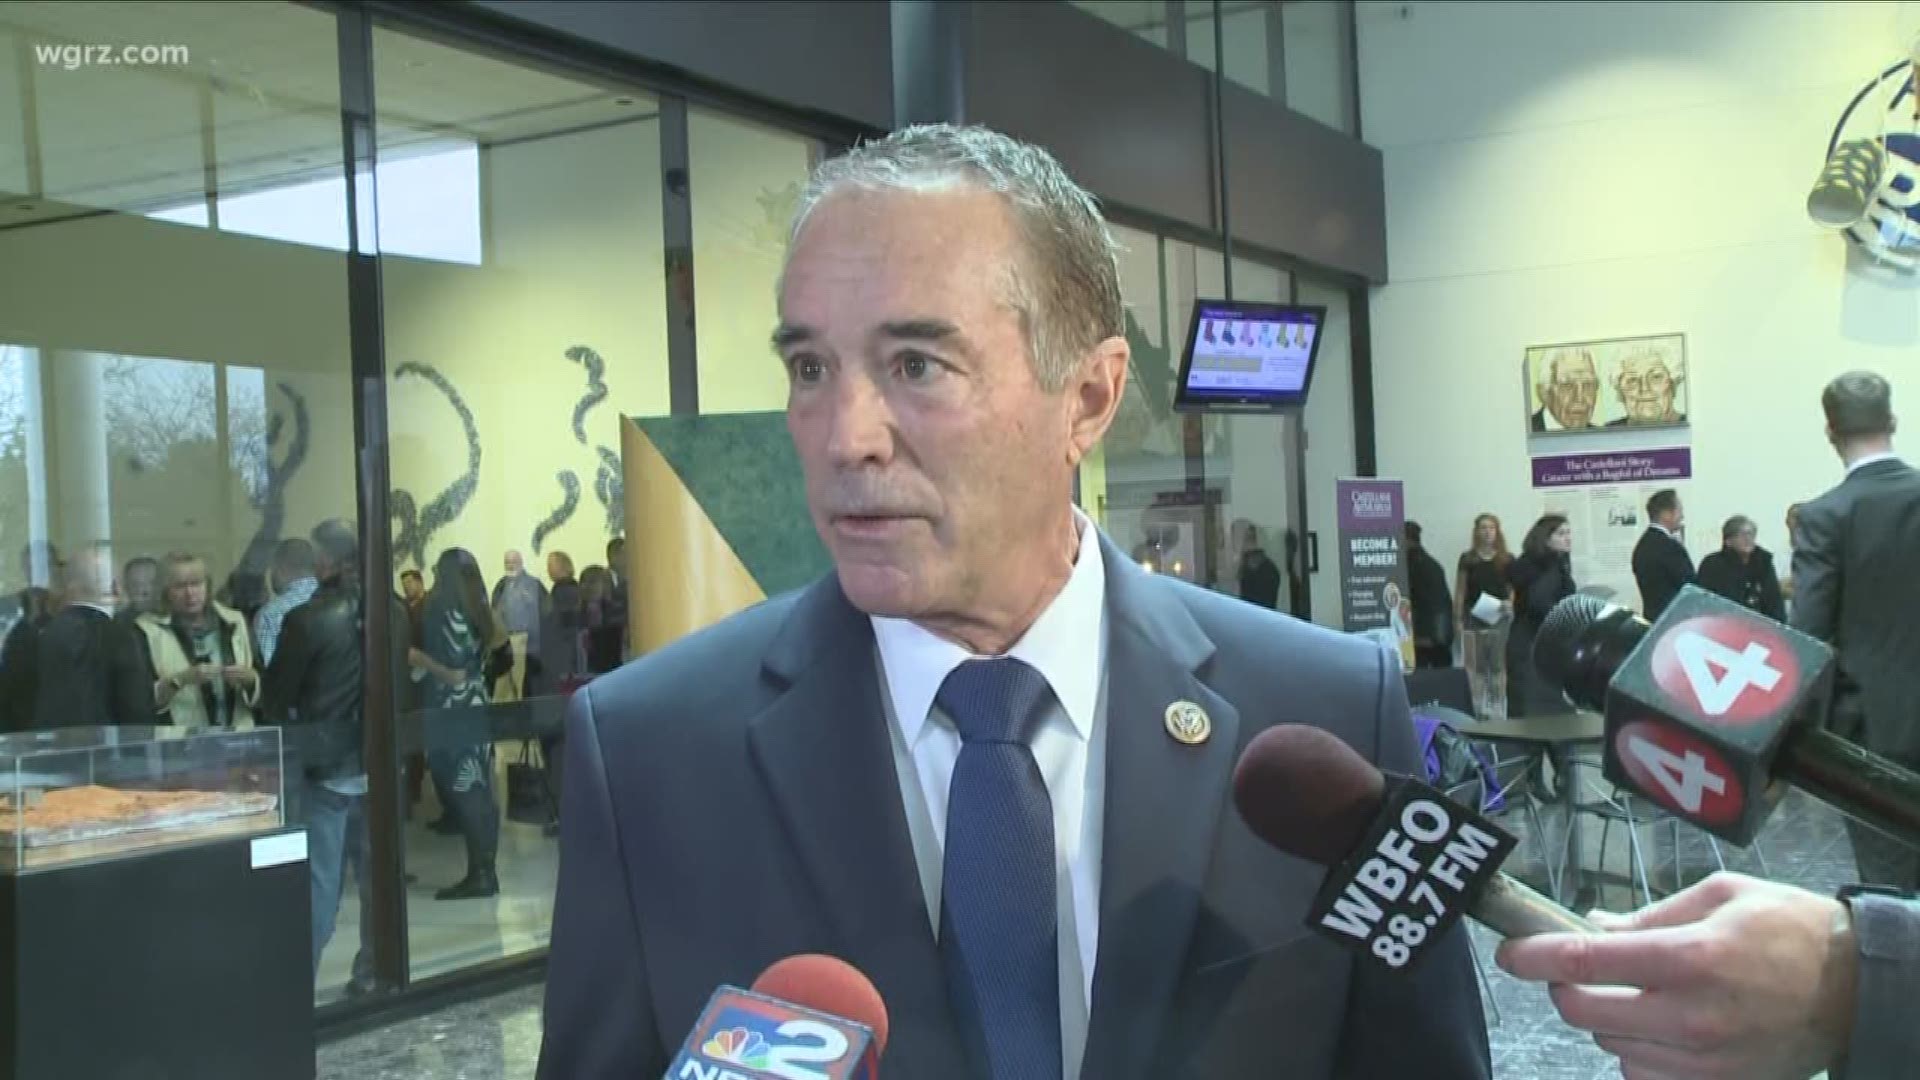 Continuing to follow the latest after Chris Collins arrest